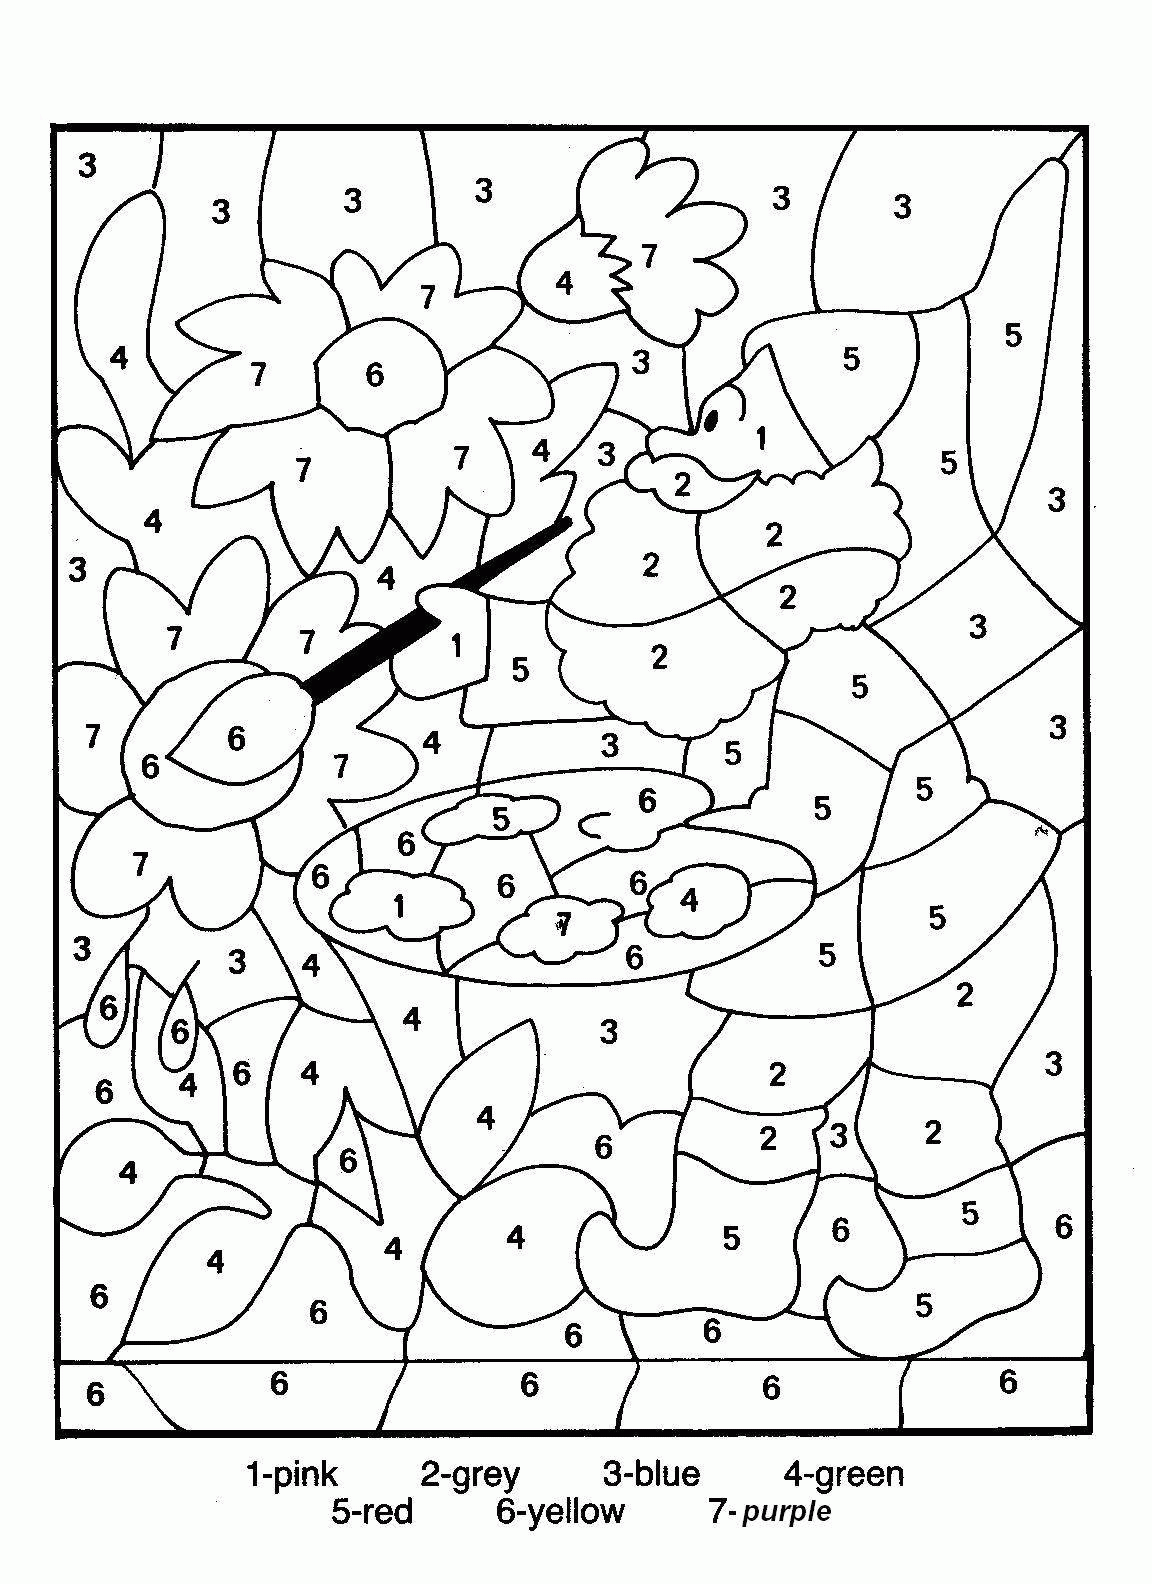 coloring-page-free-color-by-number-pages-for-adults-free-coloring-home